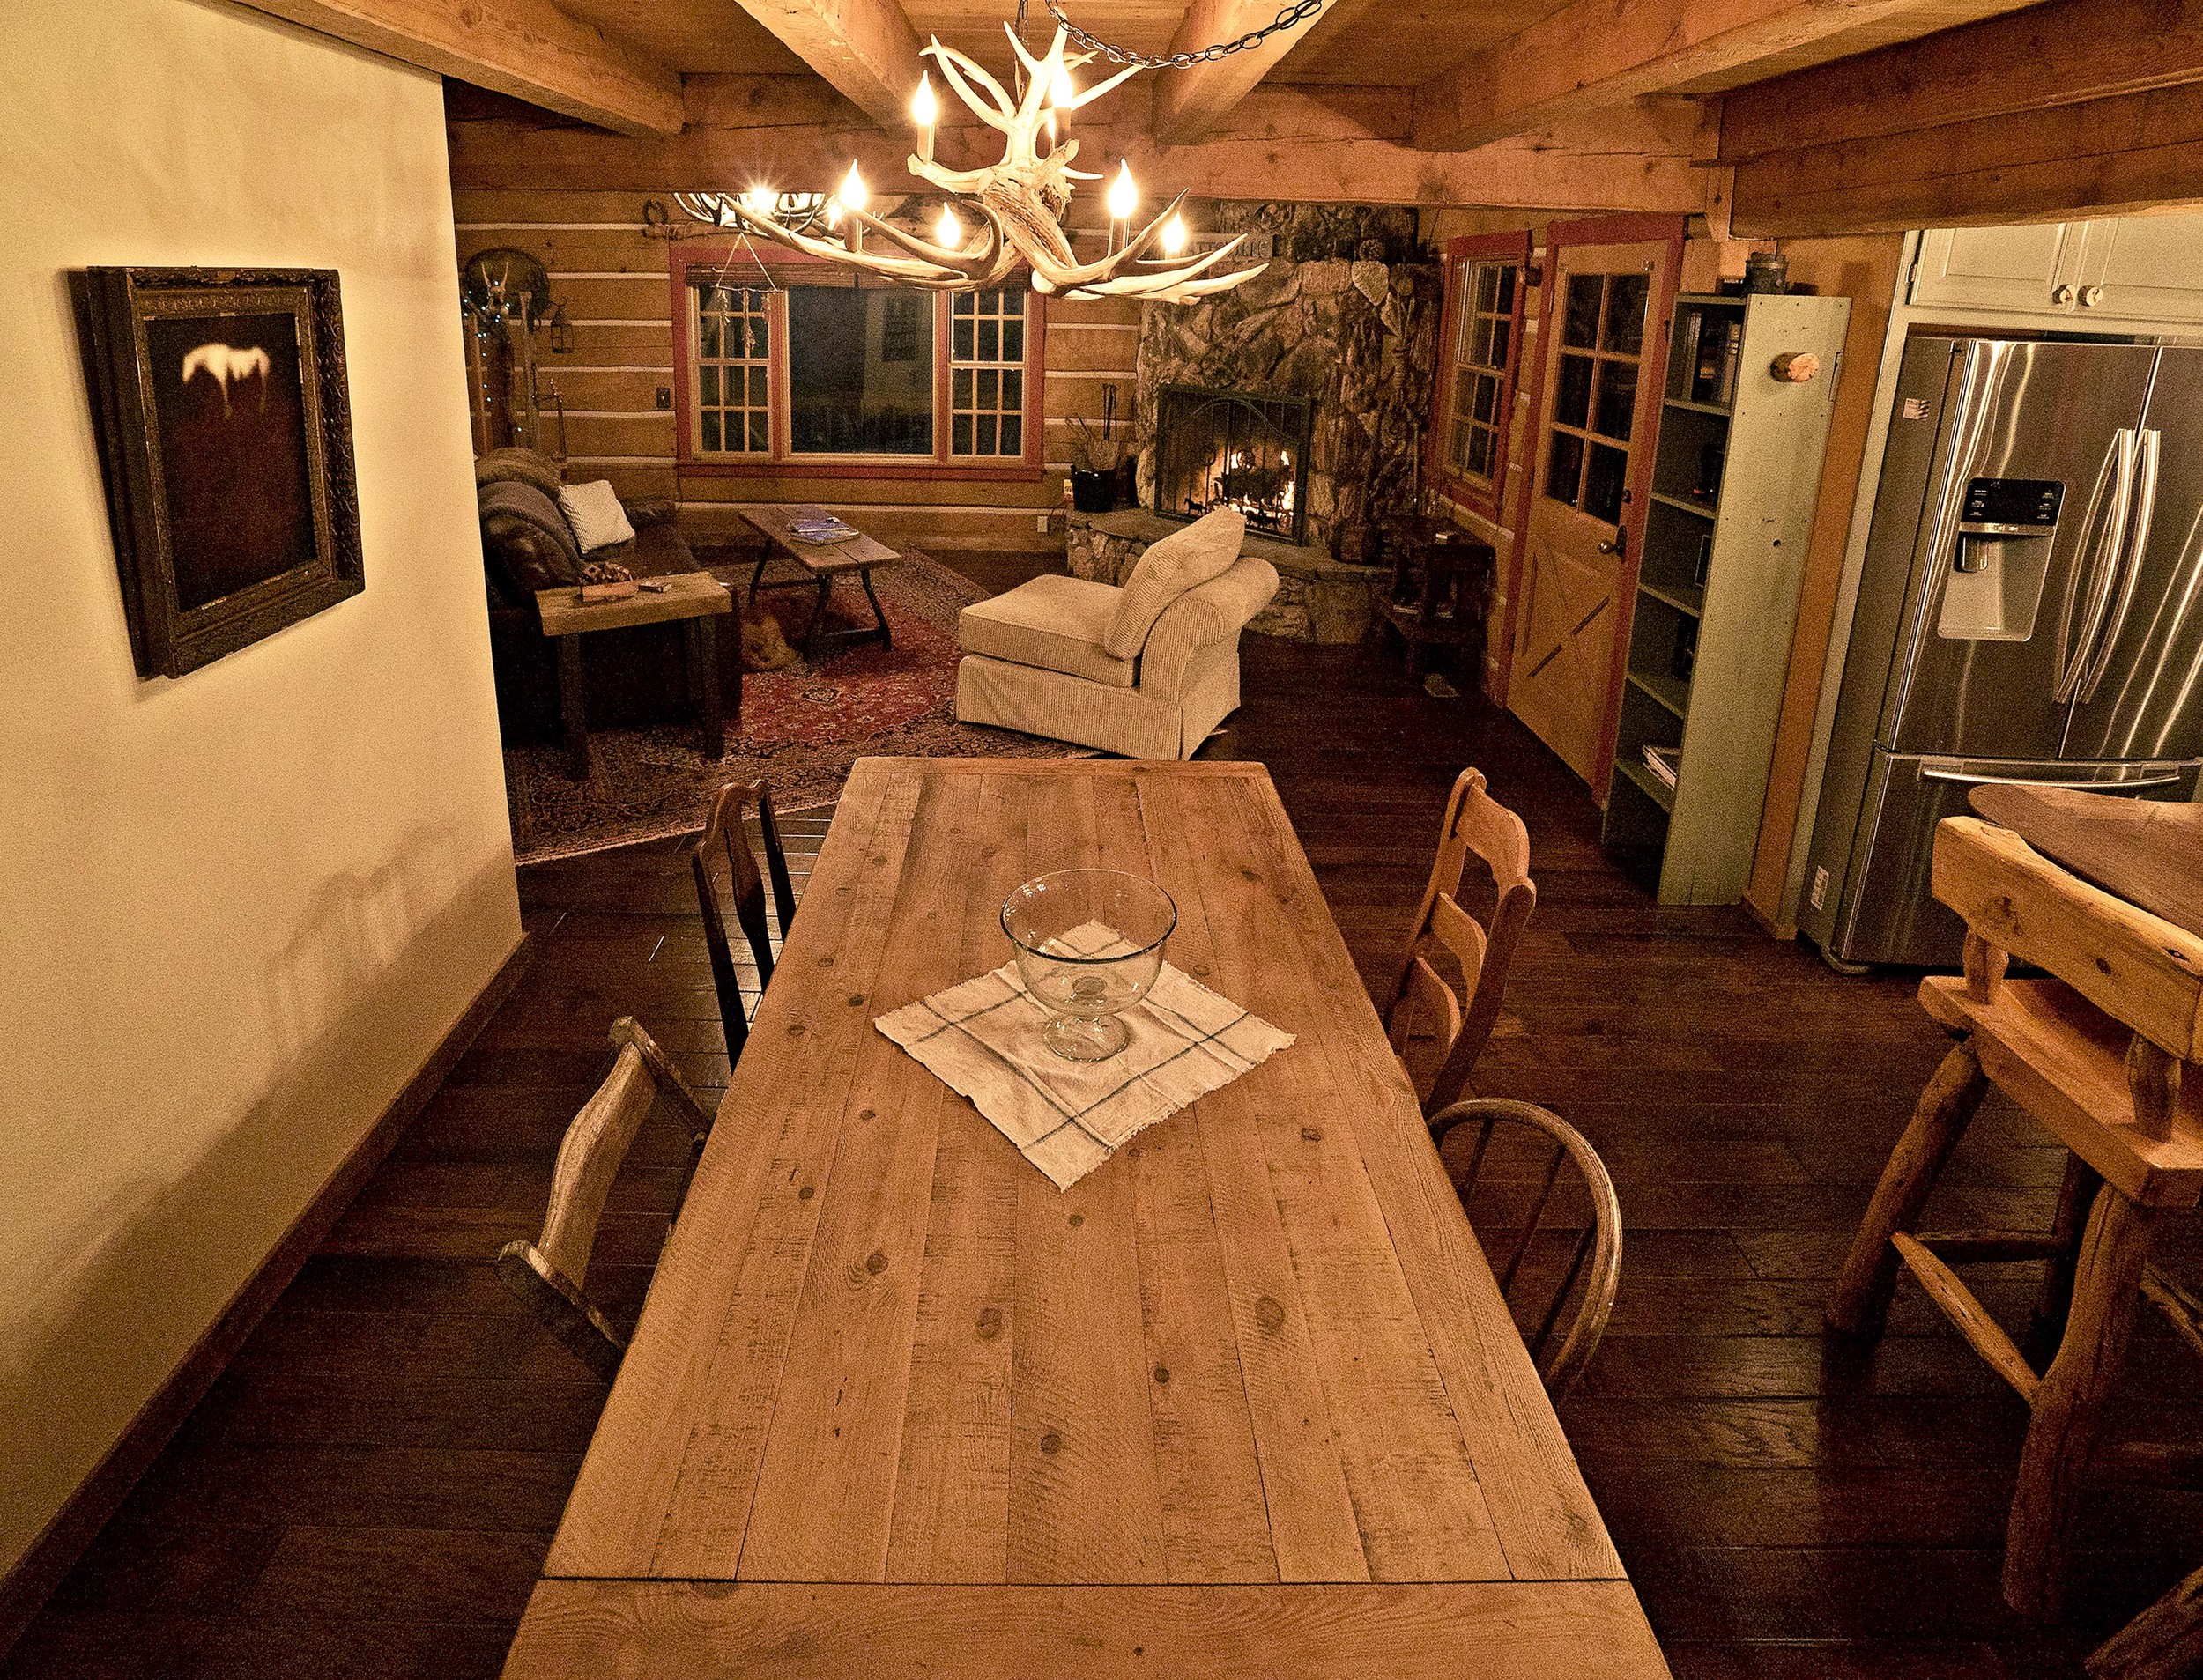 Dining Room Table View.jpg